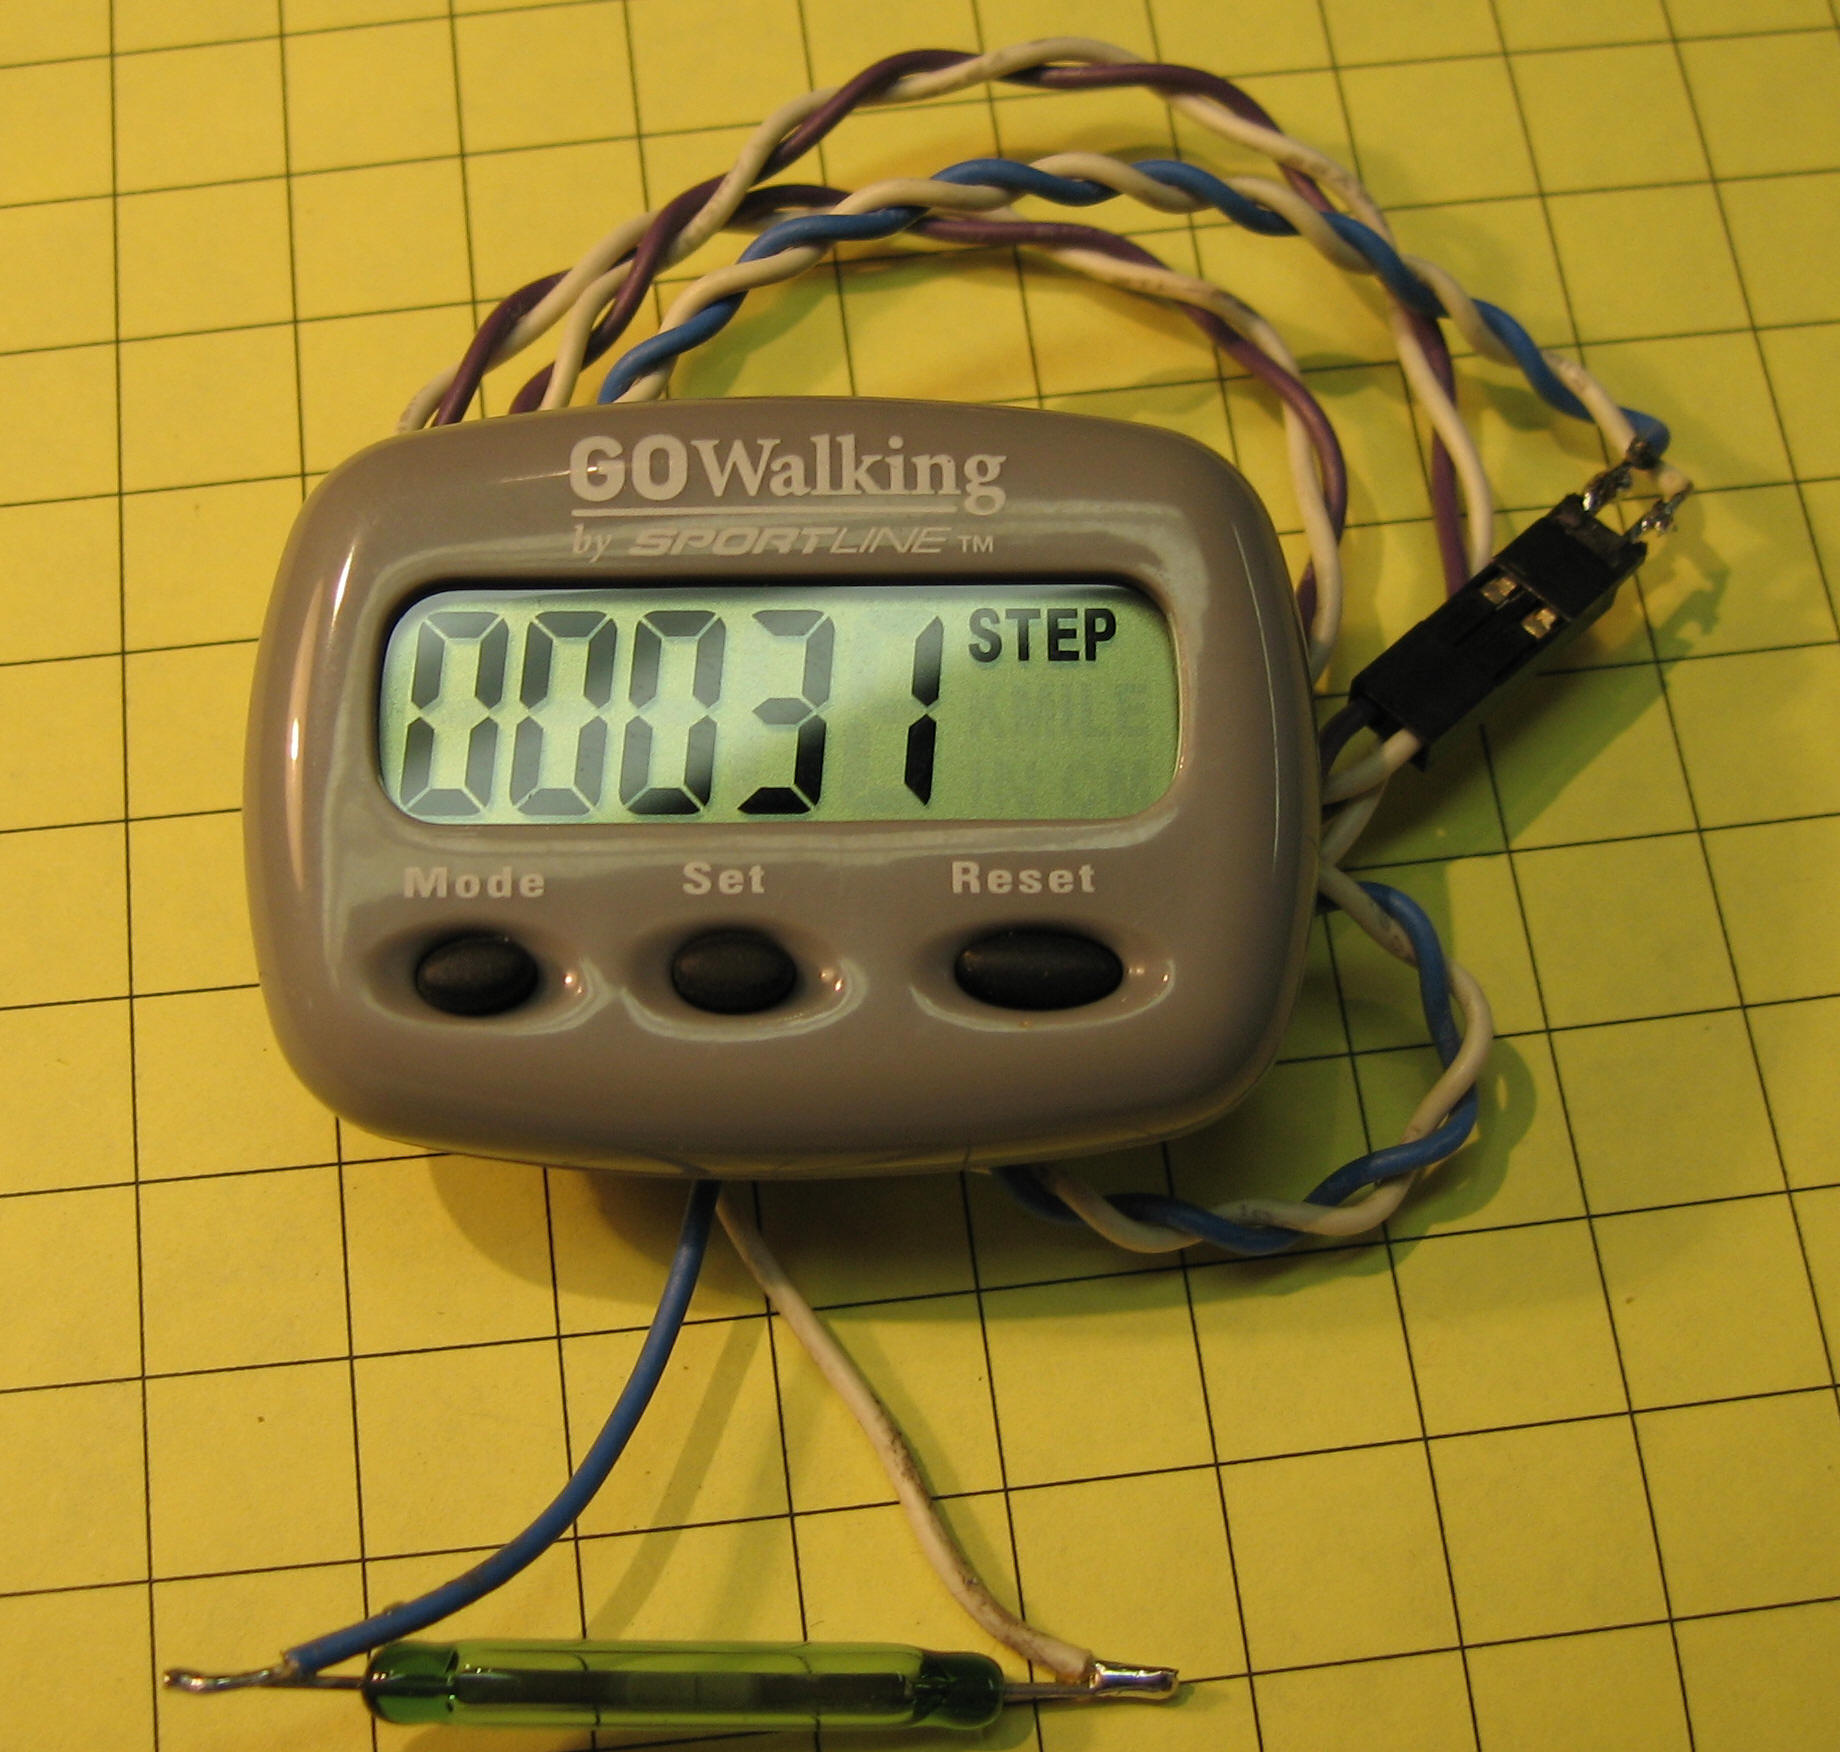 http://trainelectronics.com/artcles/pedometer/images/front_reed.jpg